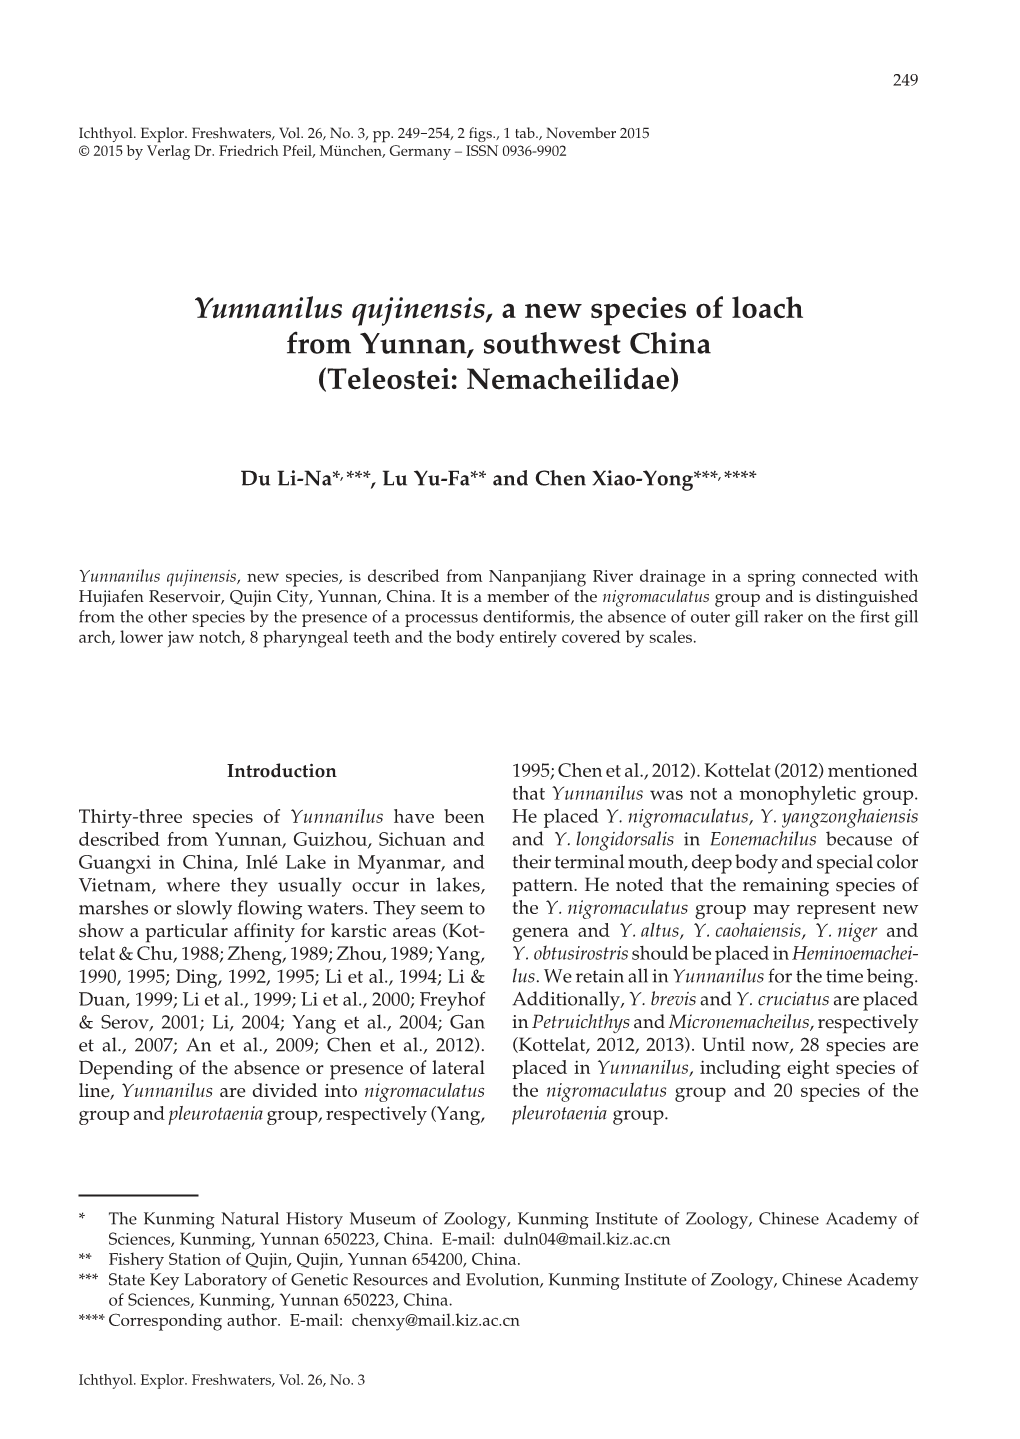 Yunnanilus Qujinensis, a New Species of Loach from Yunnan, Southwest China (Teleostei: Nemacheilidae)